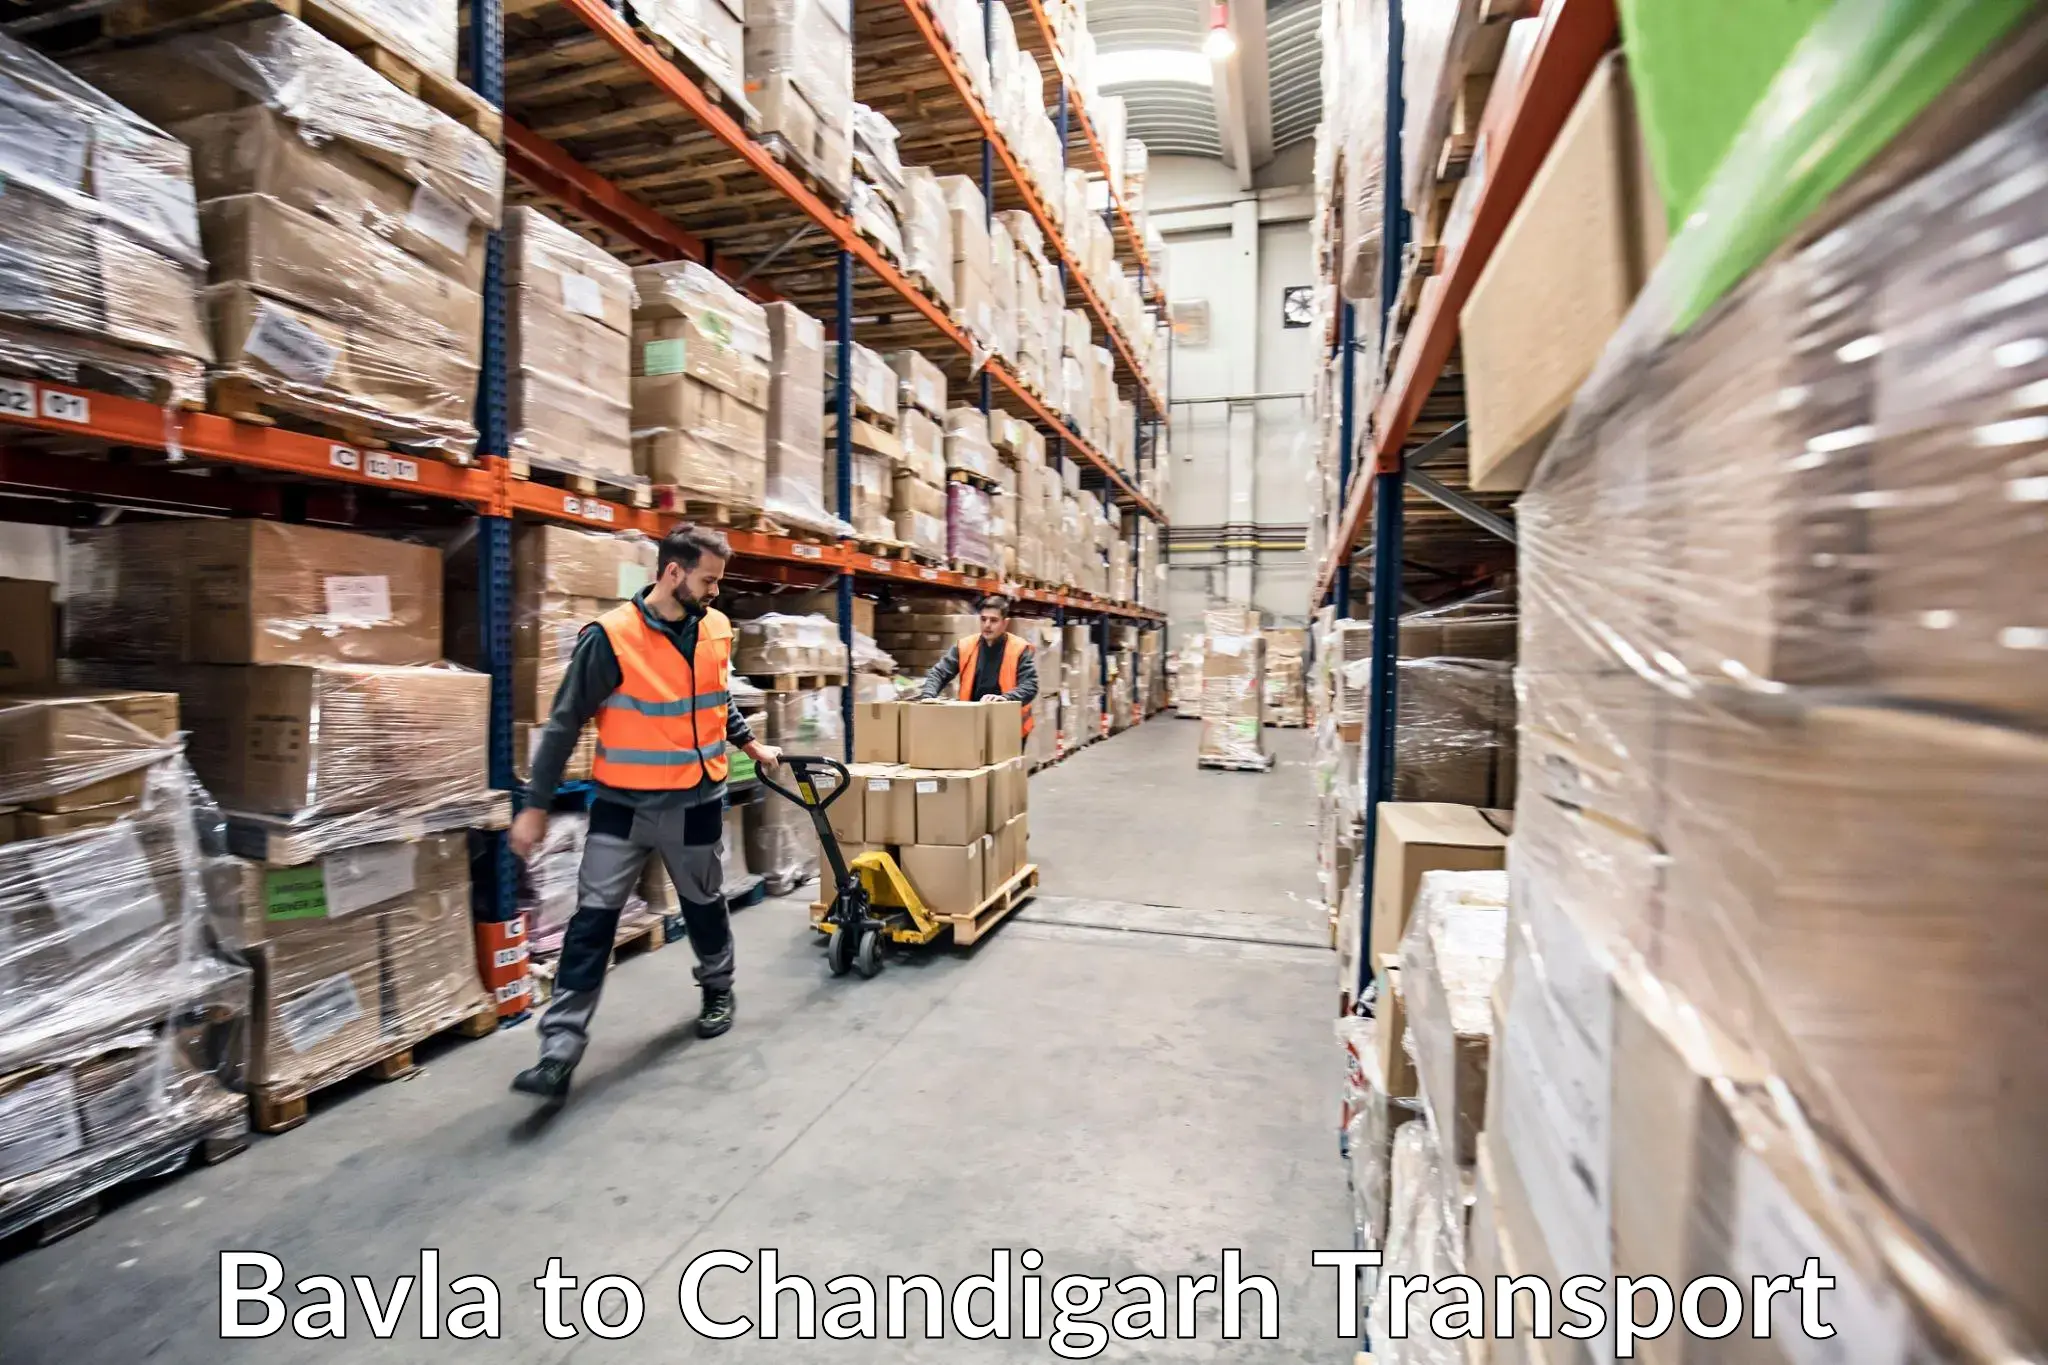 Part load transport service in India Bavla to Chandigarh